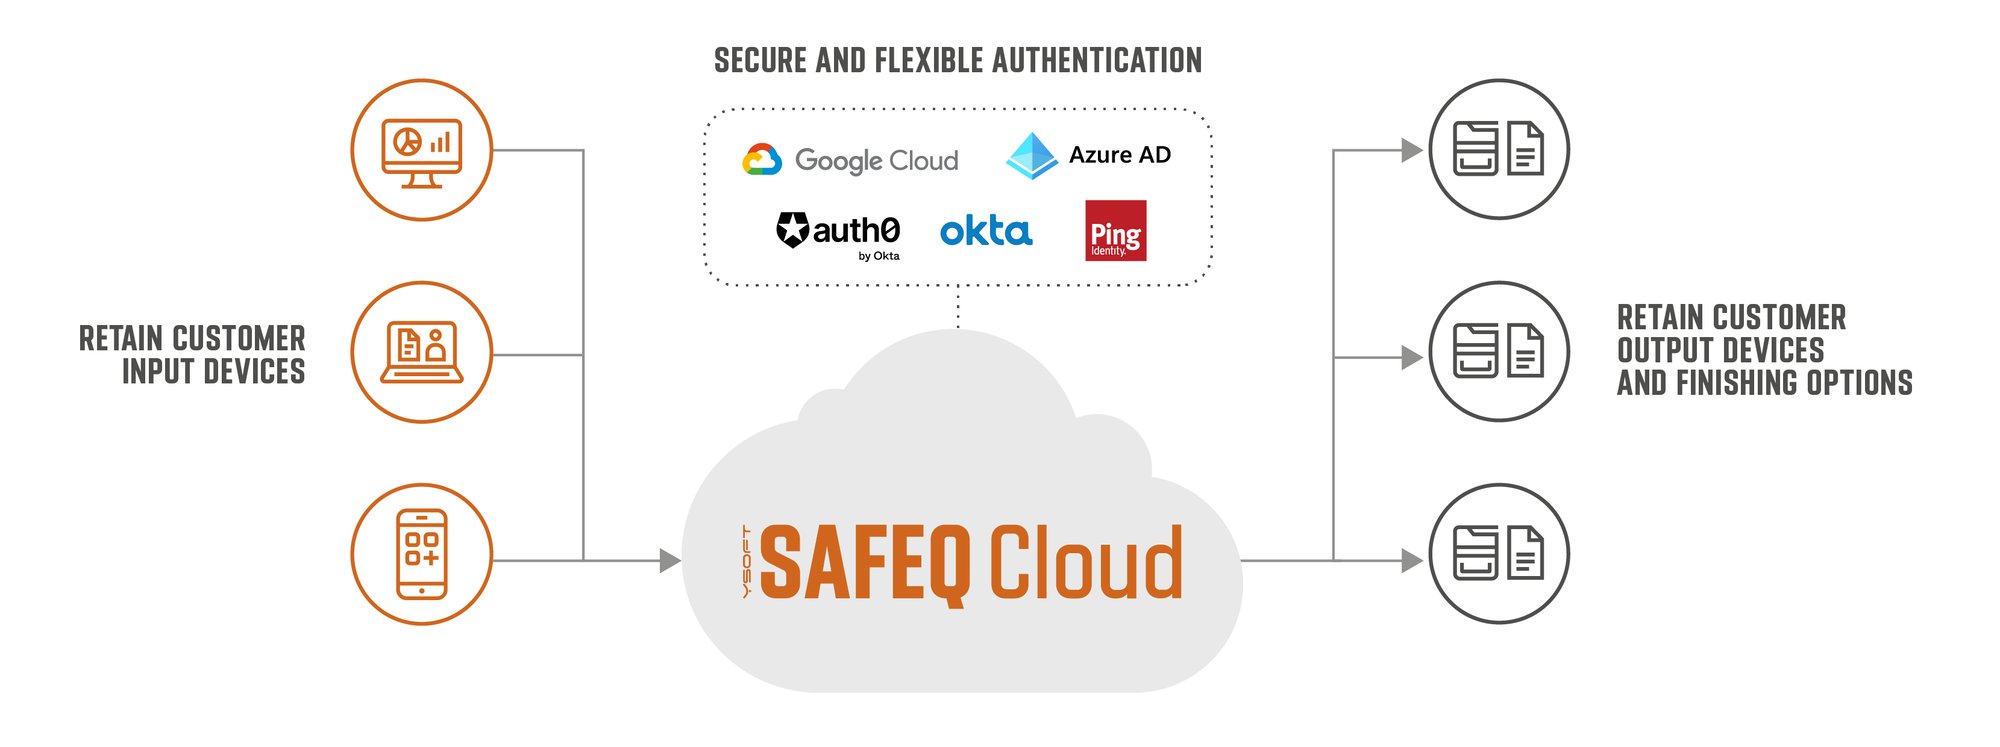 Secure and flexible authentication